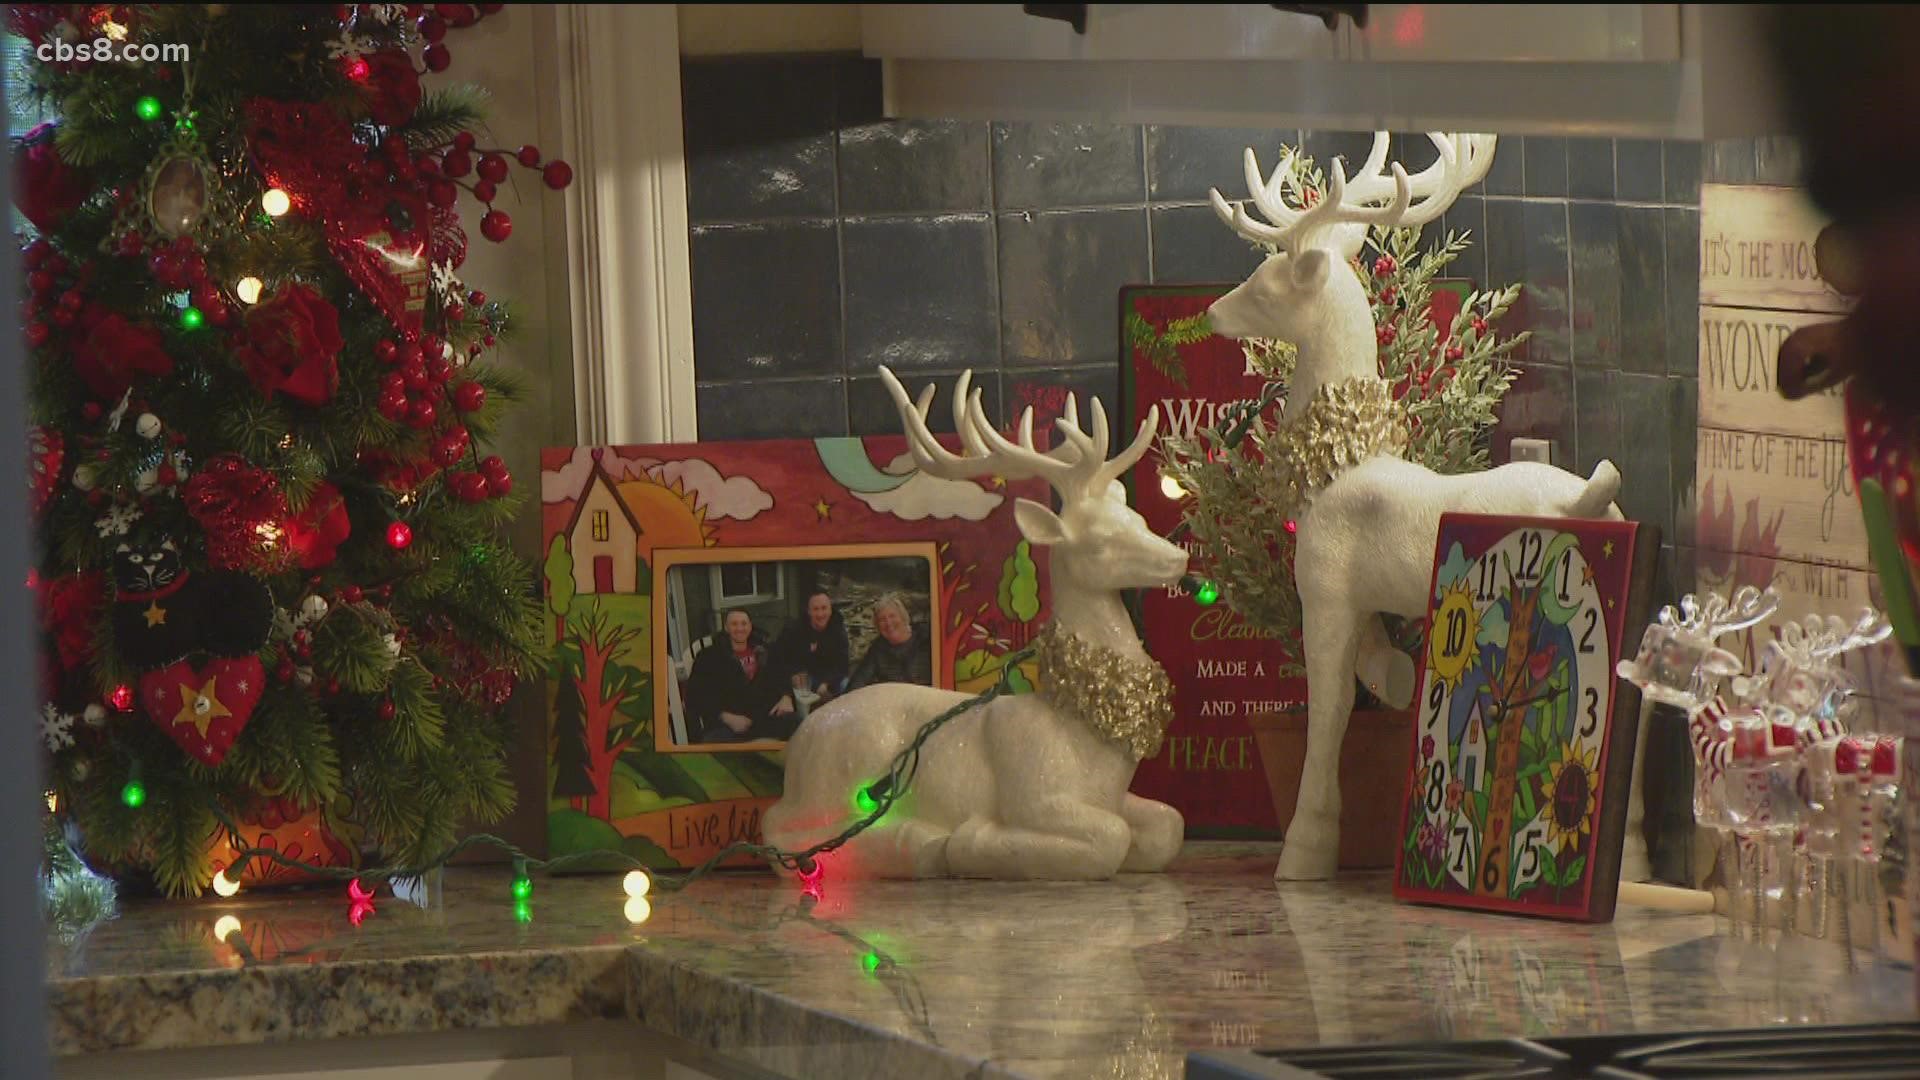 Shawn Styles got a look inside one of the Candy Cane Court houses, Laurie Hinzman is a retired educator and has the holiday spirit throughout her home.